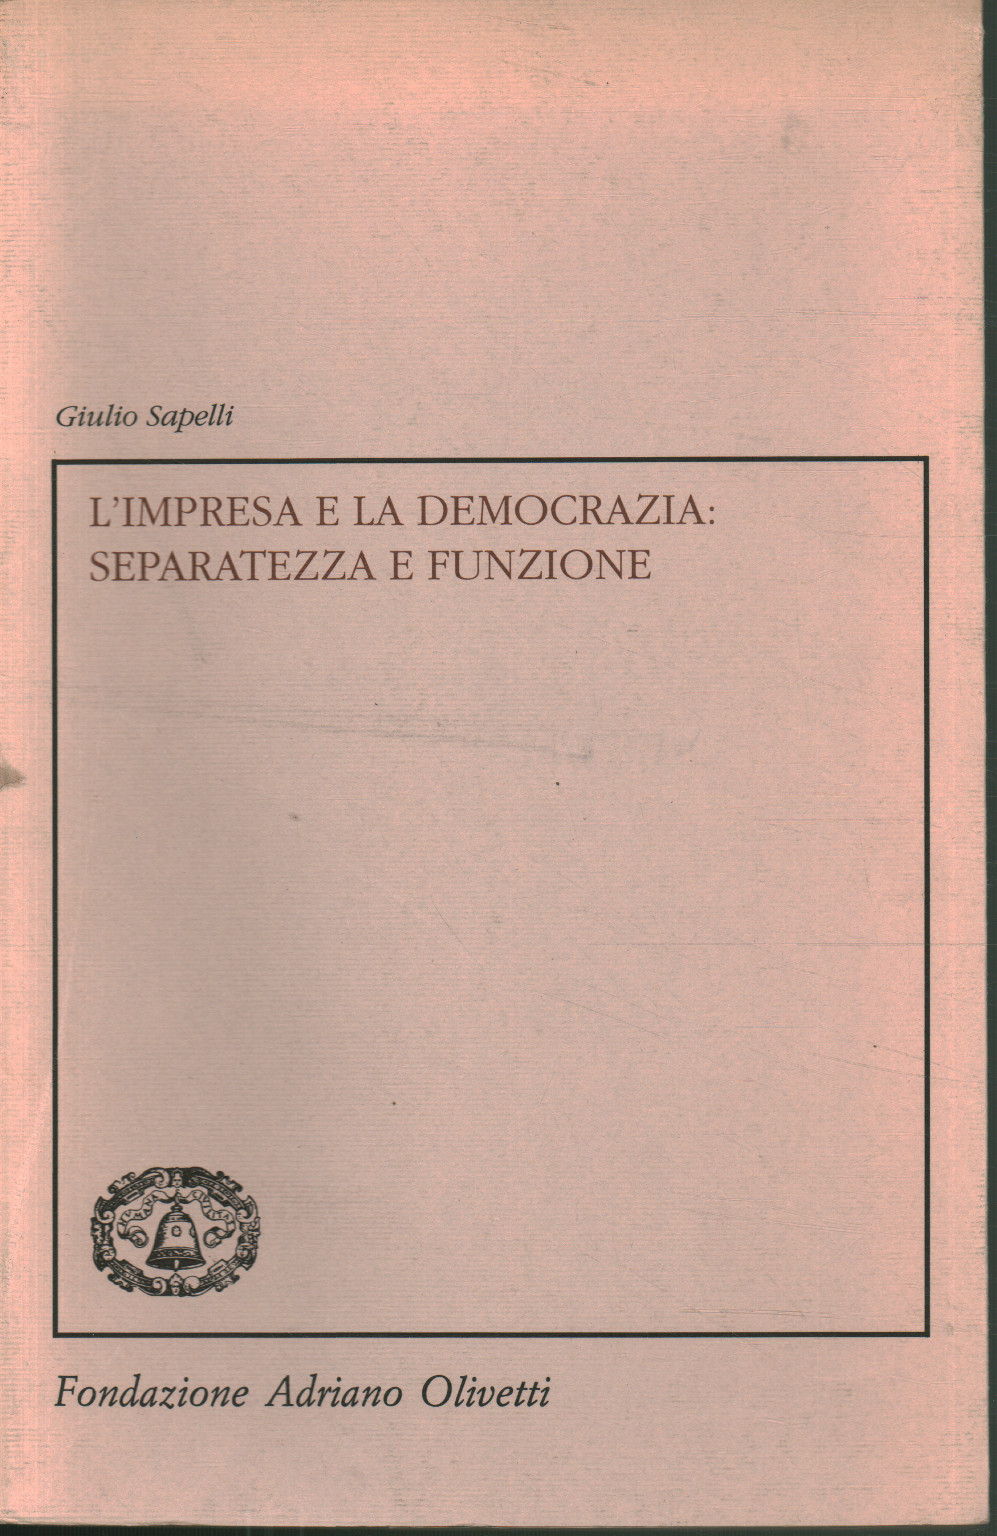 Business and democracy: separateness and function, Giulio Sapelli